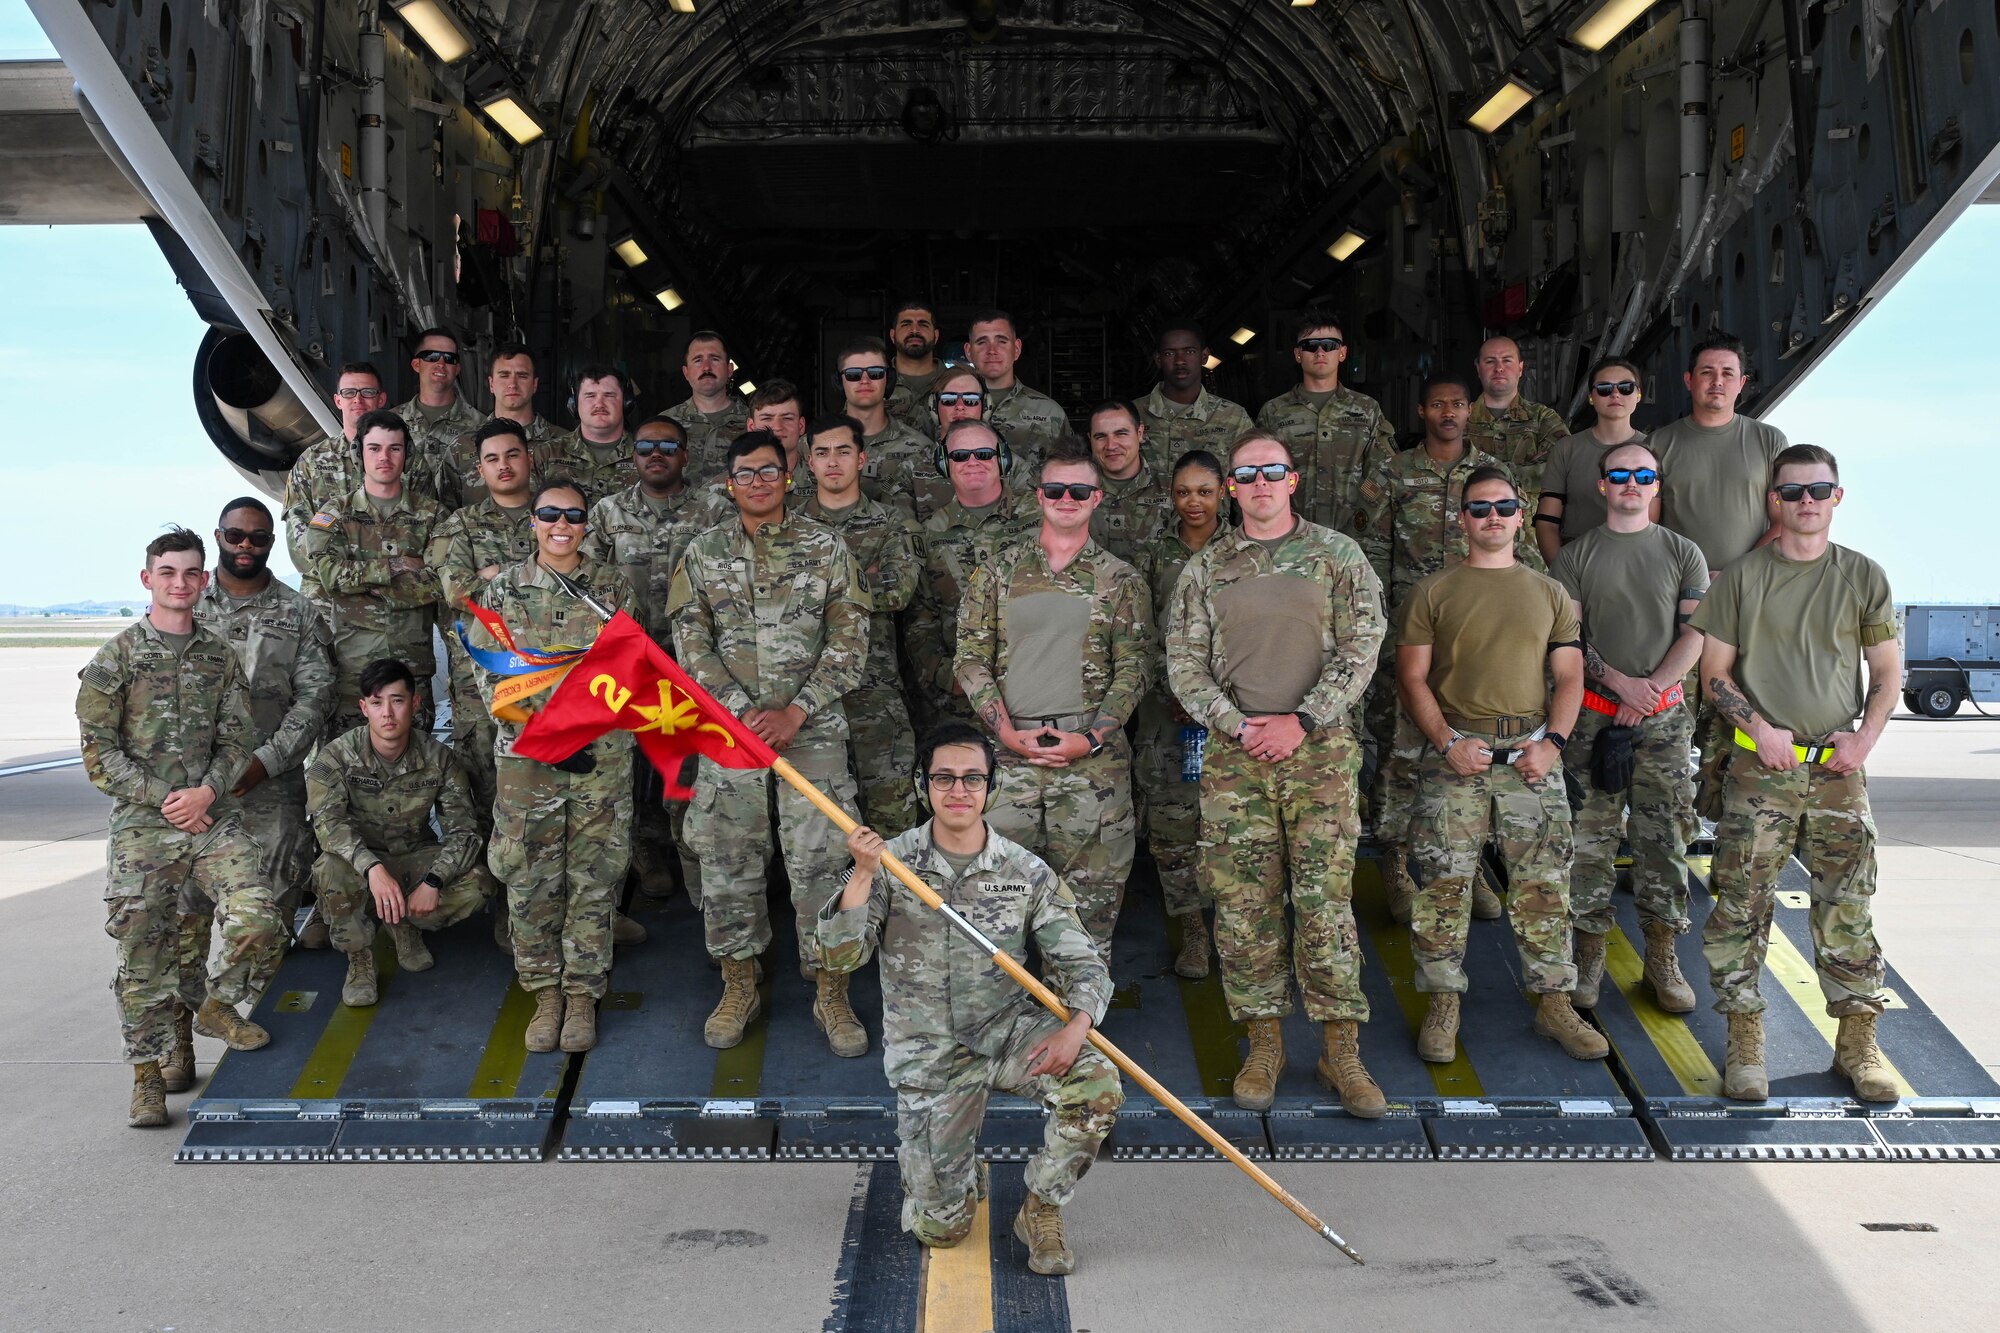 U.S. Airmen from the 97th Air Mobility Wing pose for a photo with U.S. Soldiers from the 3rd Battalion, 2nd Air Defense Artillery Regiment from the 31st Air Defense Artillery Brigade stationed at Fort Sill, Oklahoma, on the flightline at Altus Air Force Base, Oklahoma, April 19, 2023. About 30 Soldiers and 13 vehicles from the 3-2 ADA BDE participated in training, while three loadmaster instructors from the 58th Airlift Squadron and six Airmen from the 97th Logistics Readiness Squadron supported their training. (U.S. Air Force photo by Senior Airman Trenton Jancze)